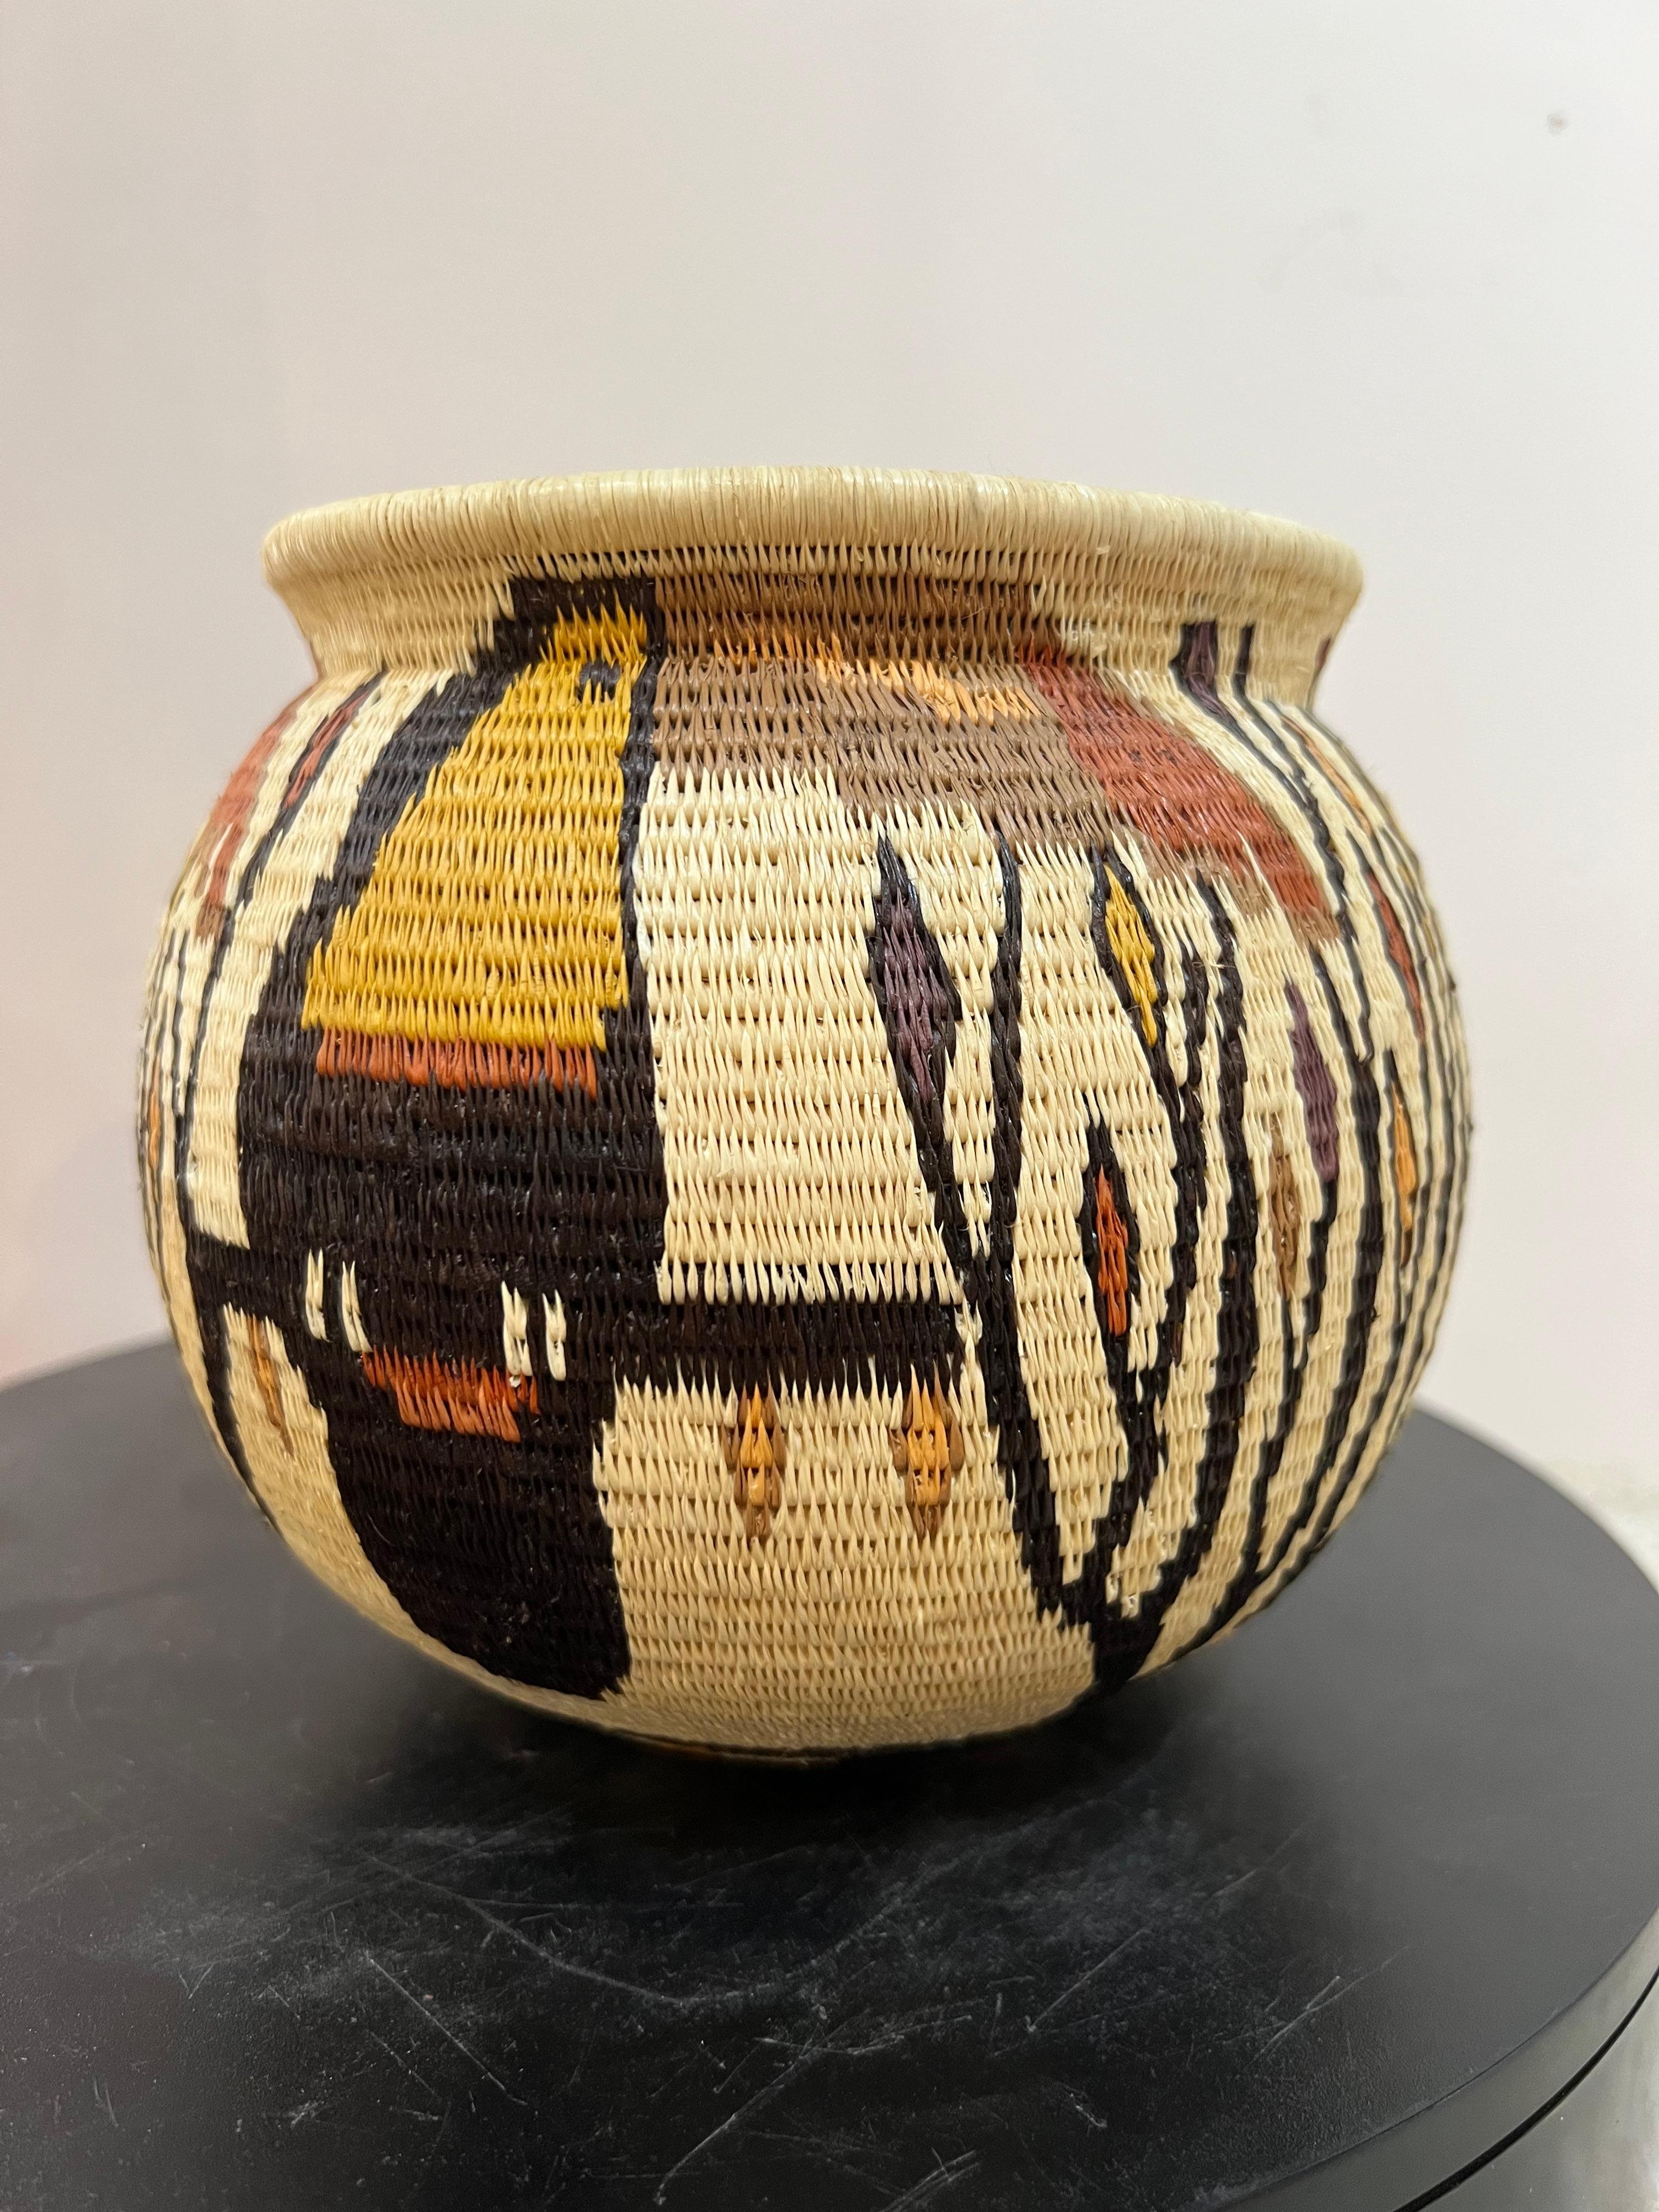 Toucan and Parrot Basket, yellow, cream, black, Tribal, Panama, Rainforest - Mixed Media Art by Unknown